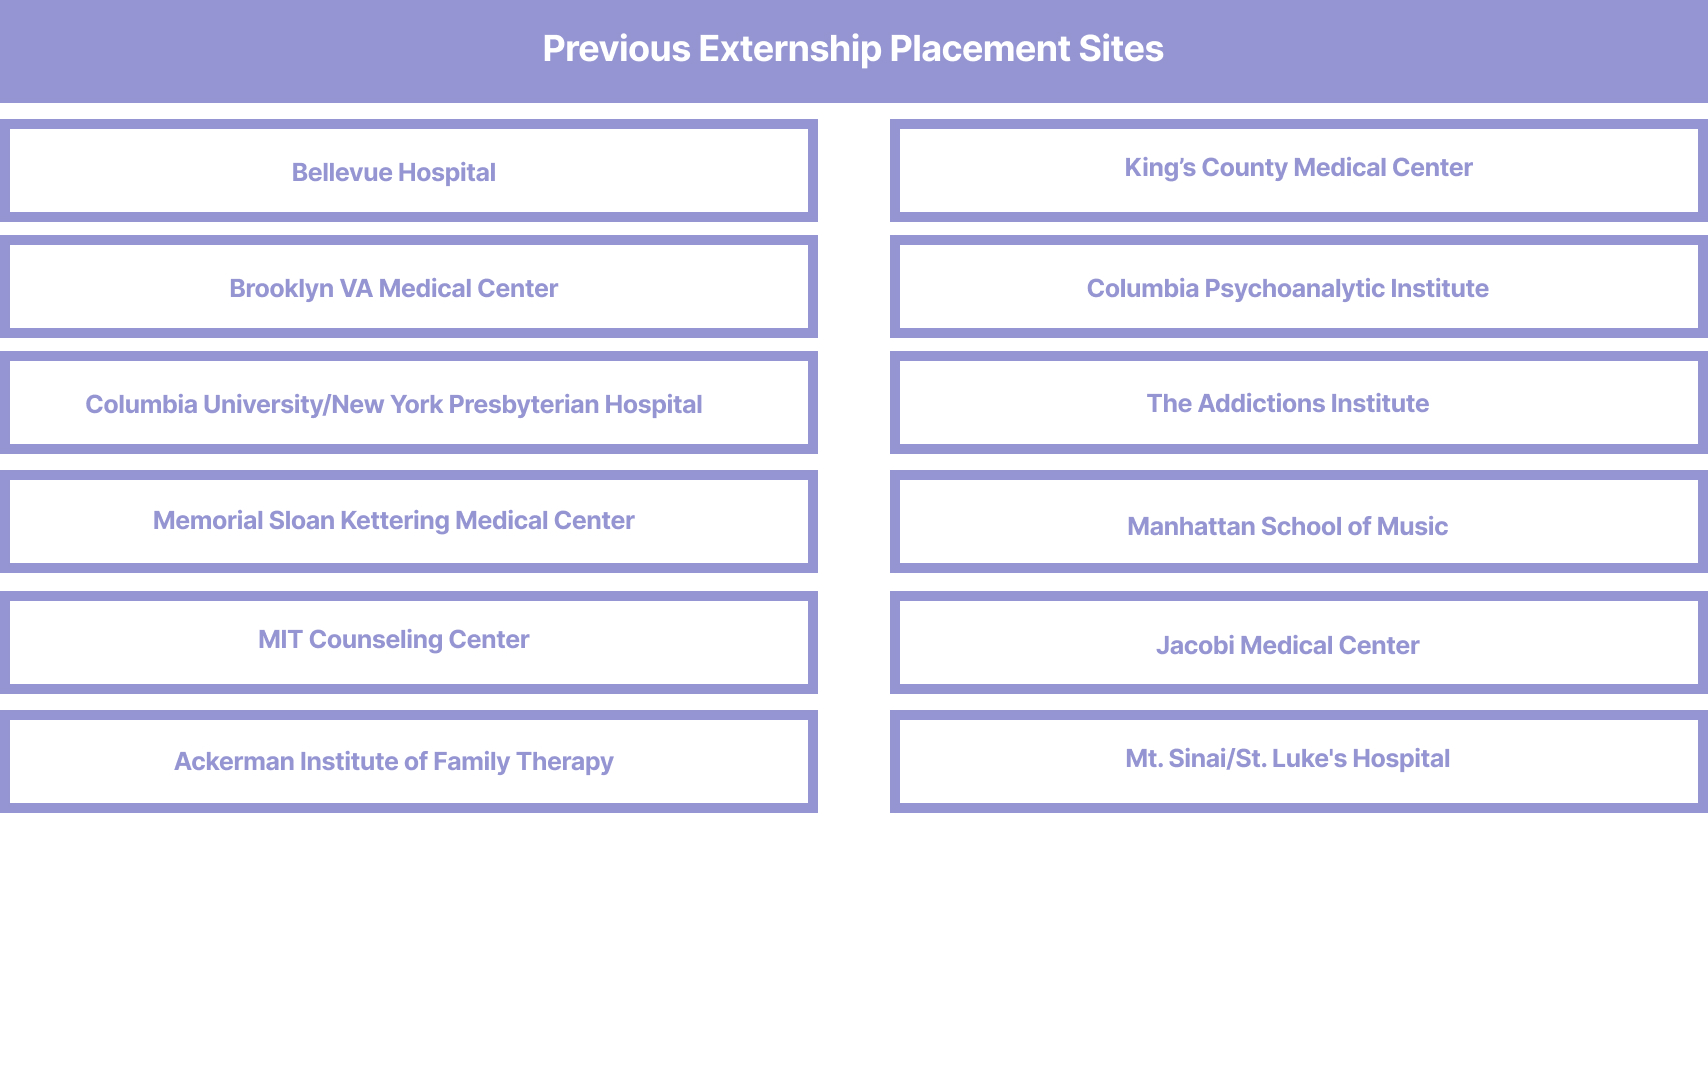 Previous Externship Placement Sites: King’s County Medical Center, Brooklyn VA Medical Center, Columbia University/New York Presbyterian Hospital, Memorial Sloane Kettering Medical Center, MIT Counseling Center, NYU Post Doctoral Program, Ackerman Institute of Family Therapy, Bellevue Hospital, North Central Bronx Medical Center, The Addictions Institute, Manhattan School of Music, Jacobi Medical Center, Mt. Sinai/St. Luke's Hospital, Columbia Psychoanalytic Institute